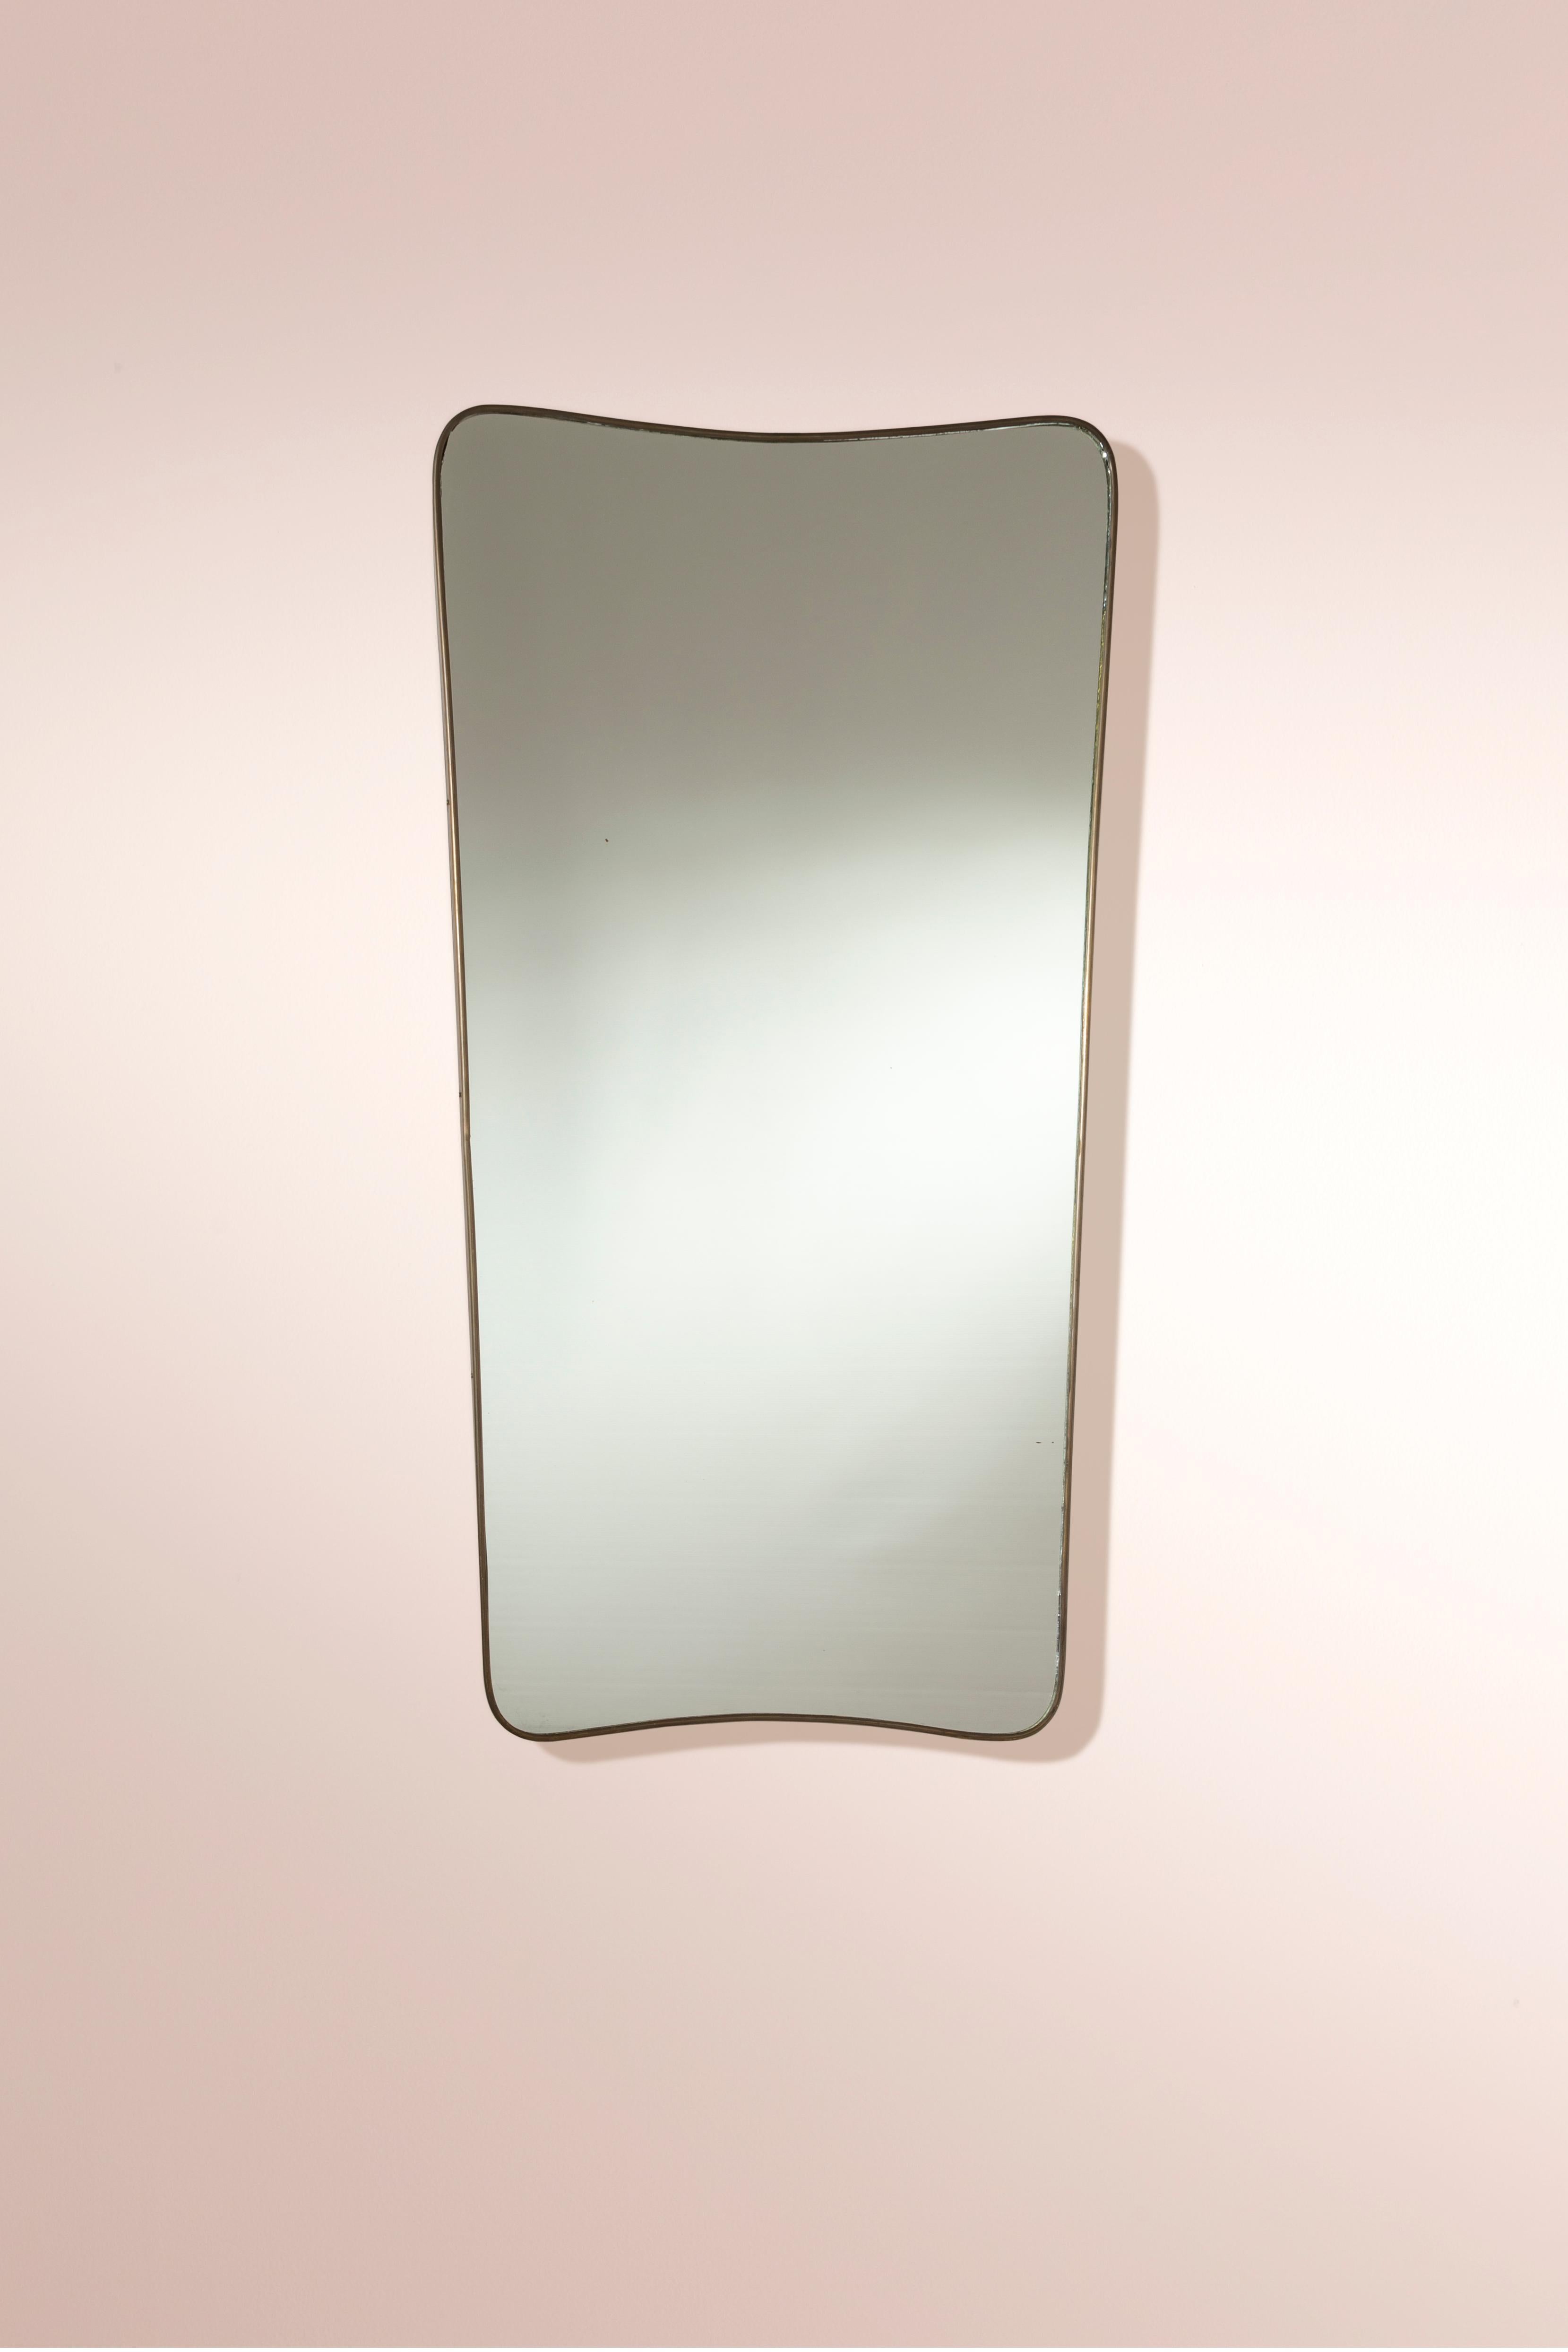 An impressive Italian brass wall mirror, reminiscent of the style of Gio Ponti and originating from the 1950s, embodies an exquisite marriage of form and function with its understated yet sophisticated design.

Meticulously crafted, this Italian